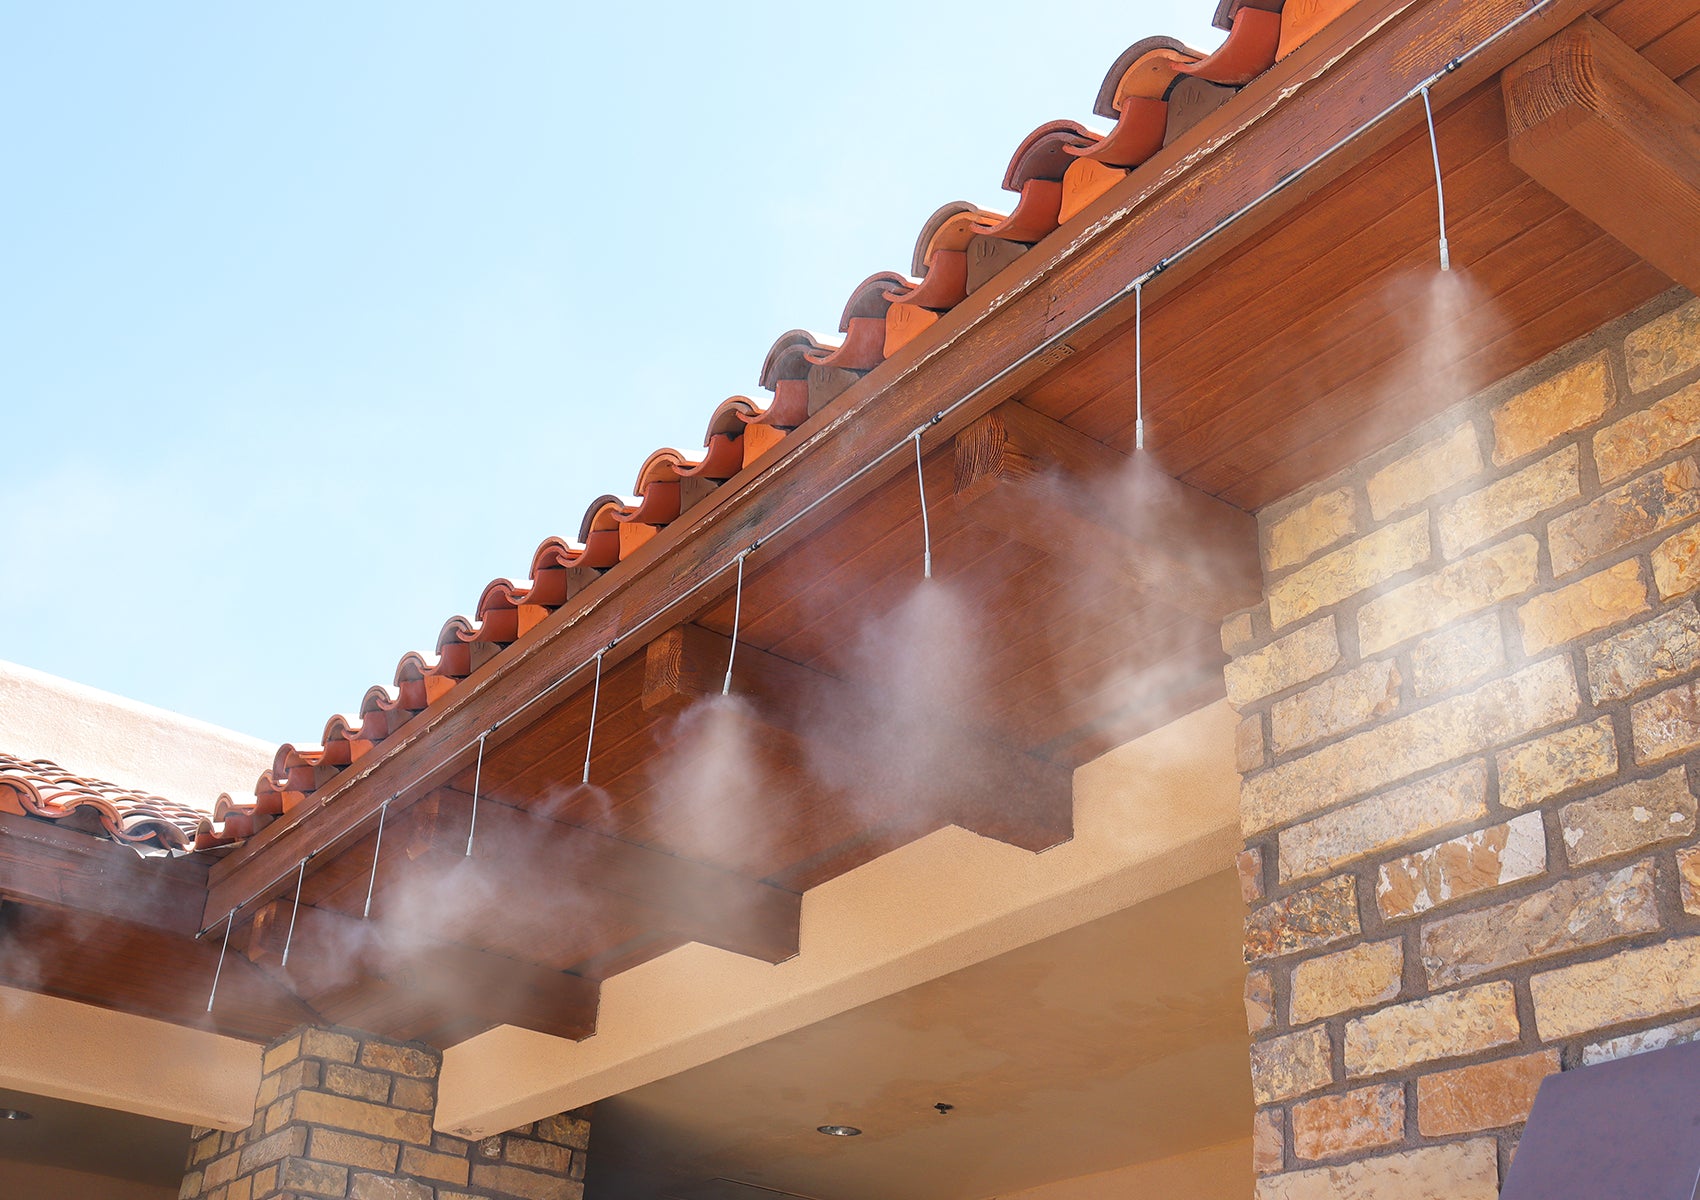 high pressure misting system with extended nozzle pipes cooling outdoors